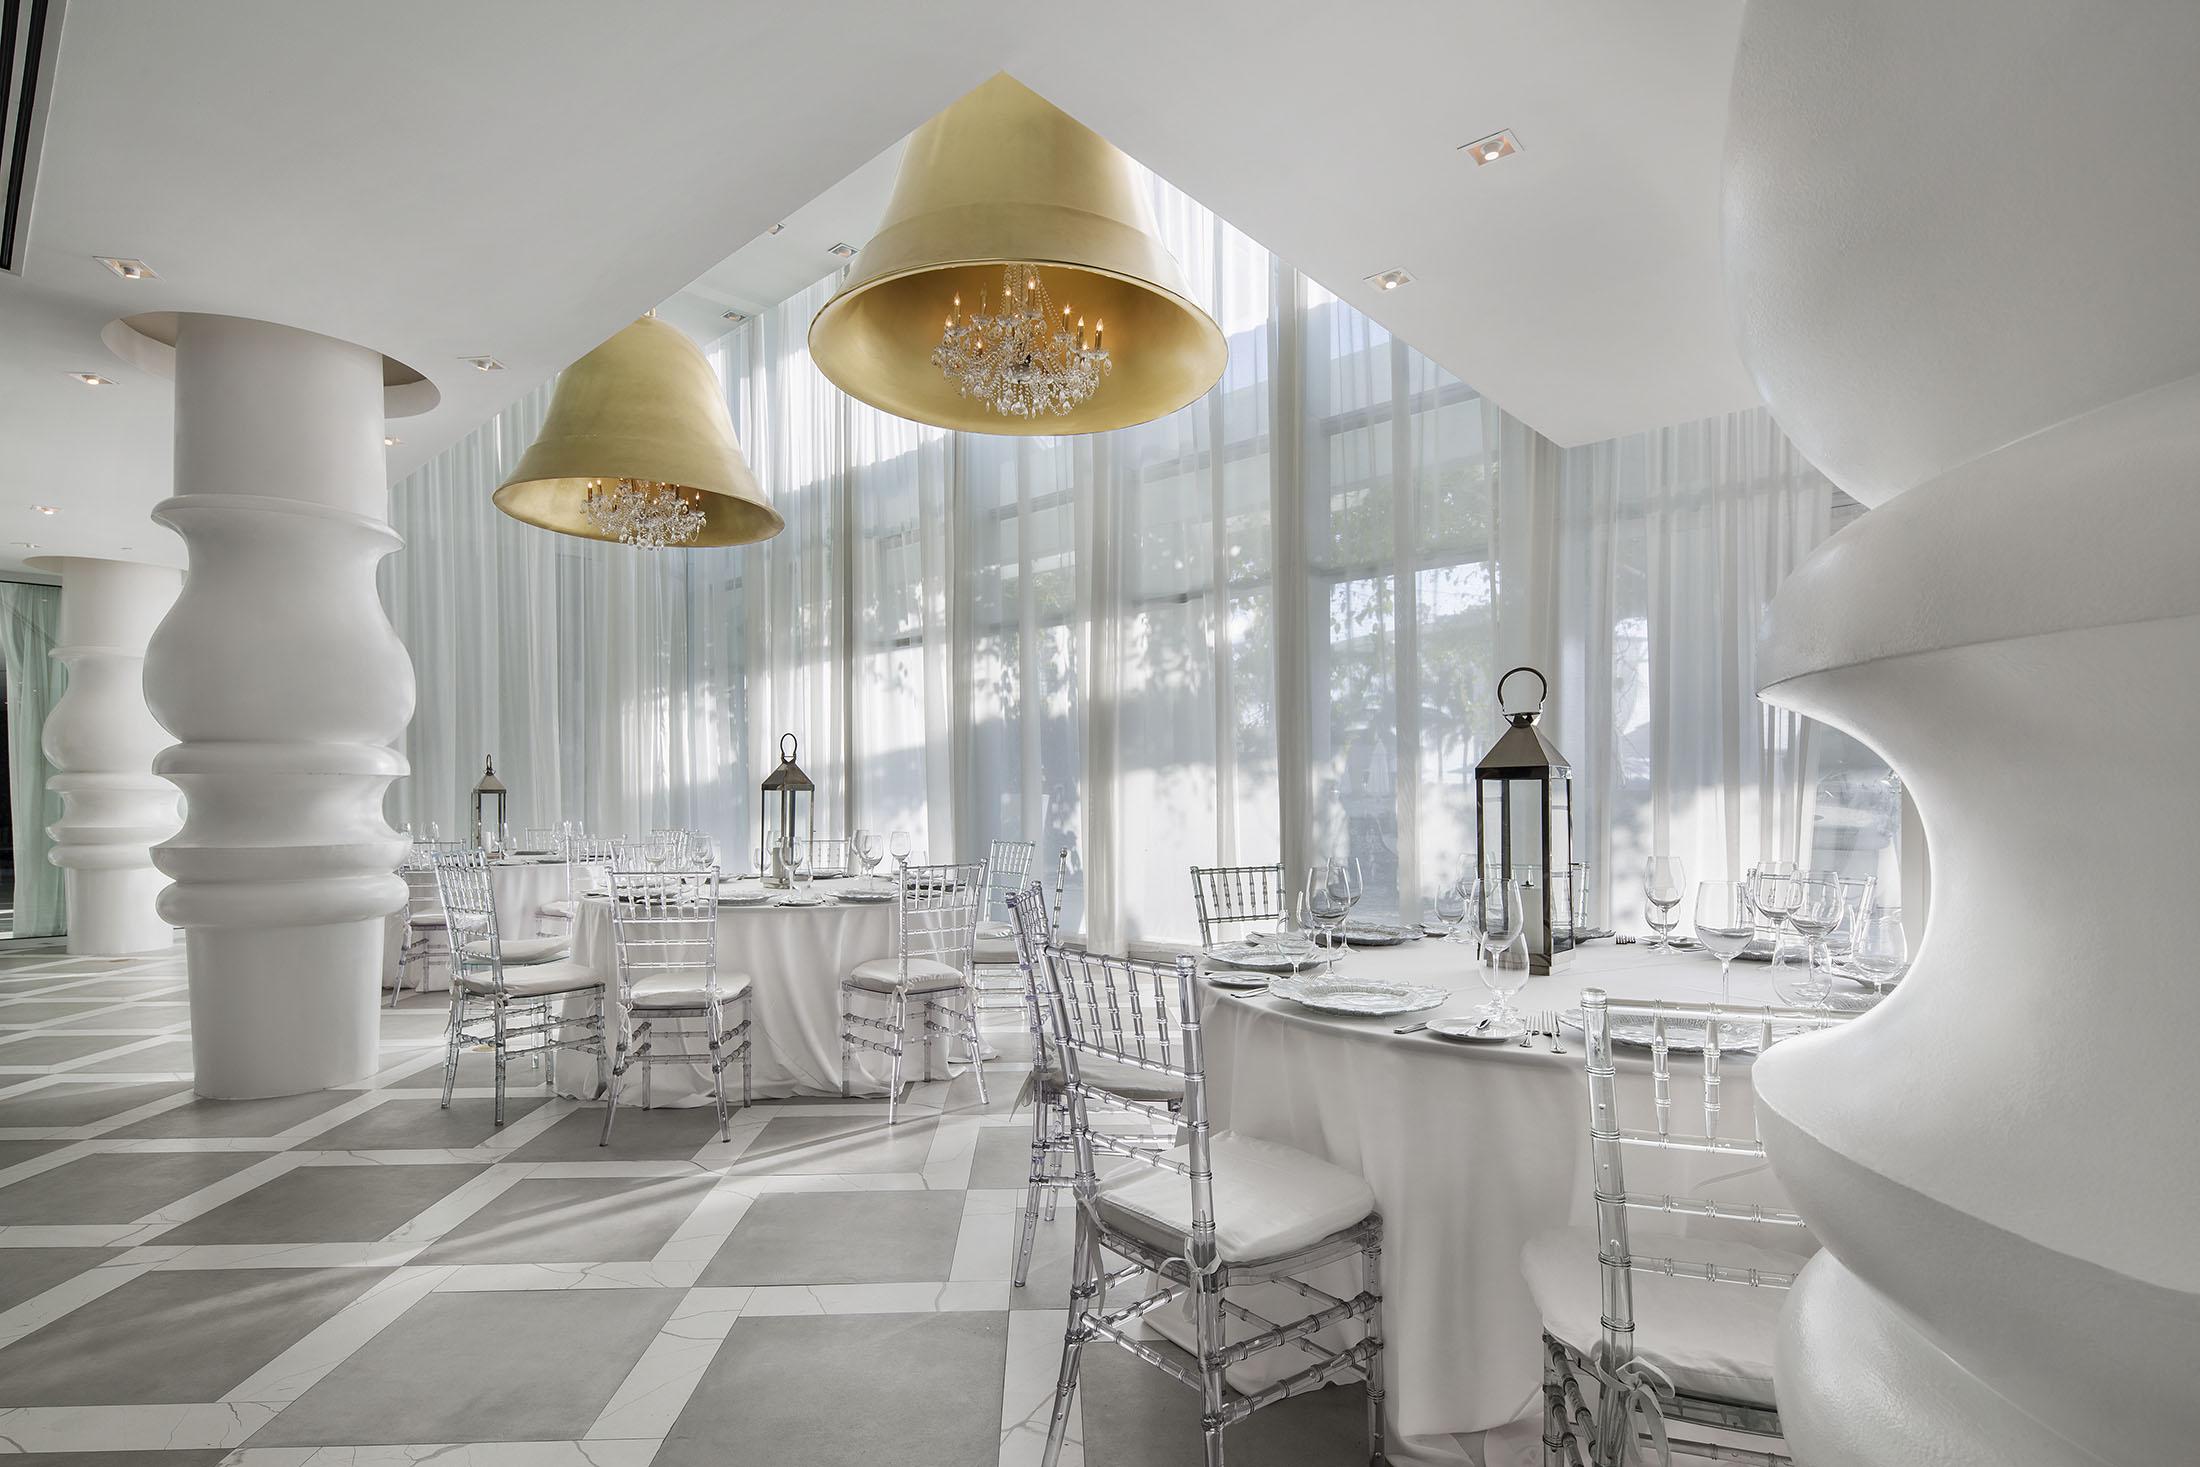 Tables and chairs set up for an event in a white room.